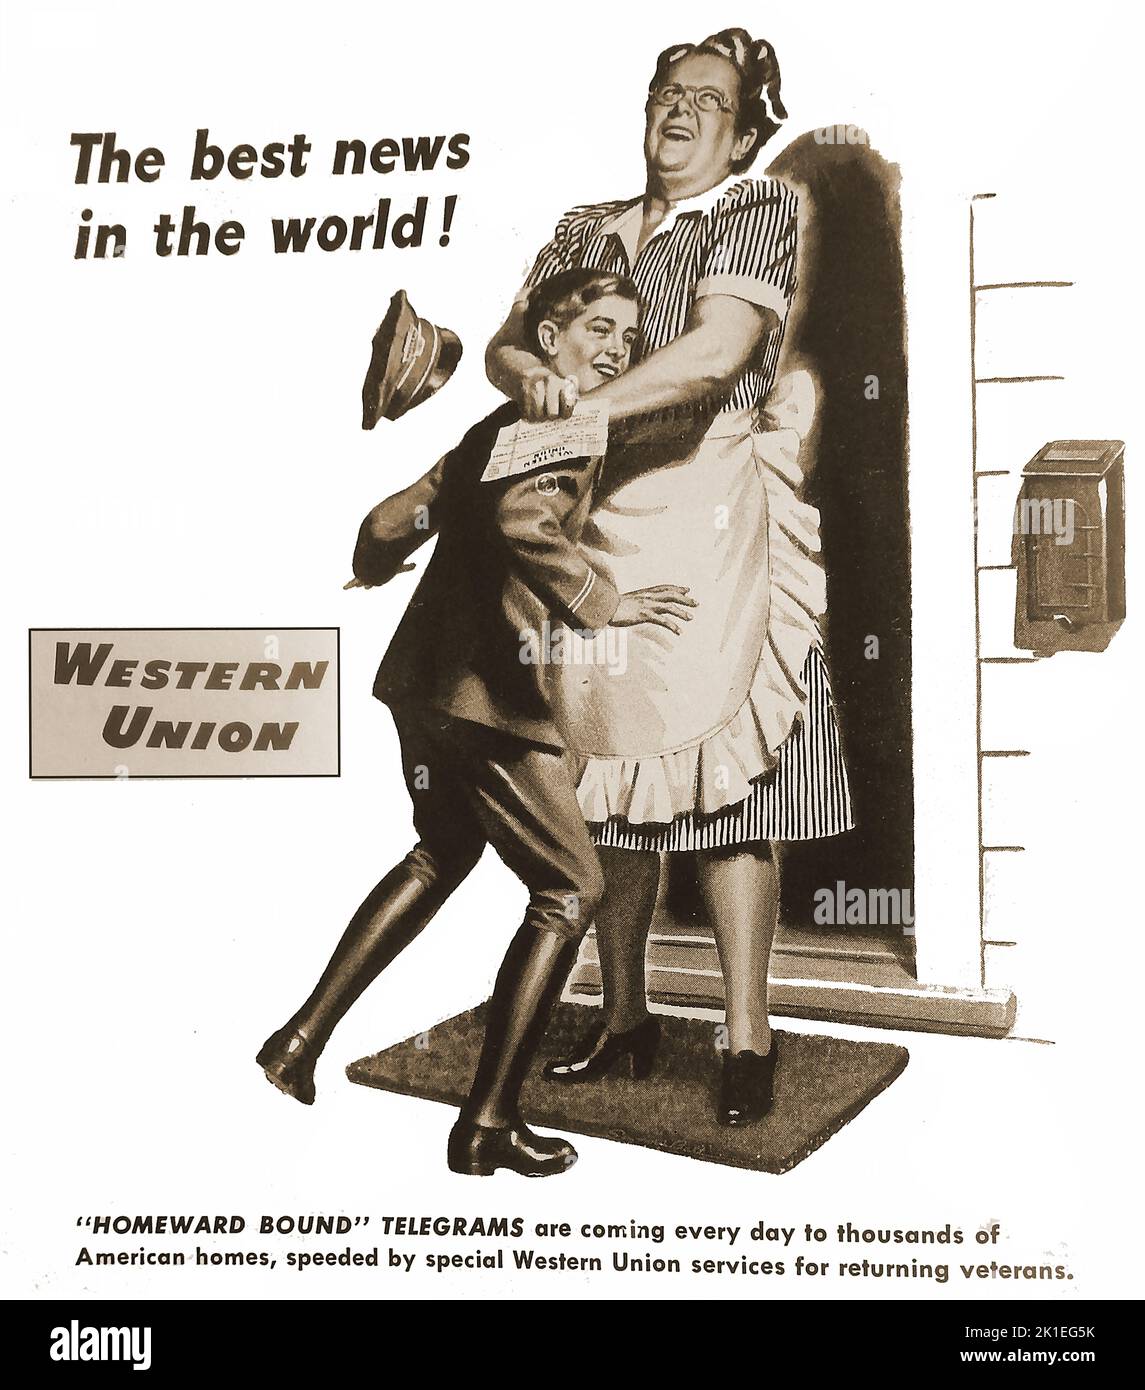 A 1947 post-war advertisement for Western Union  Homeward bound telegrams  announcing the coming home of soldiers, sailors and airmen after serving in the 2nd World War. A housewife hugs the telegram boy with delight Stock Photo